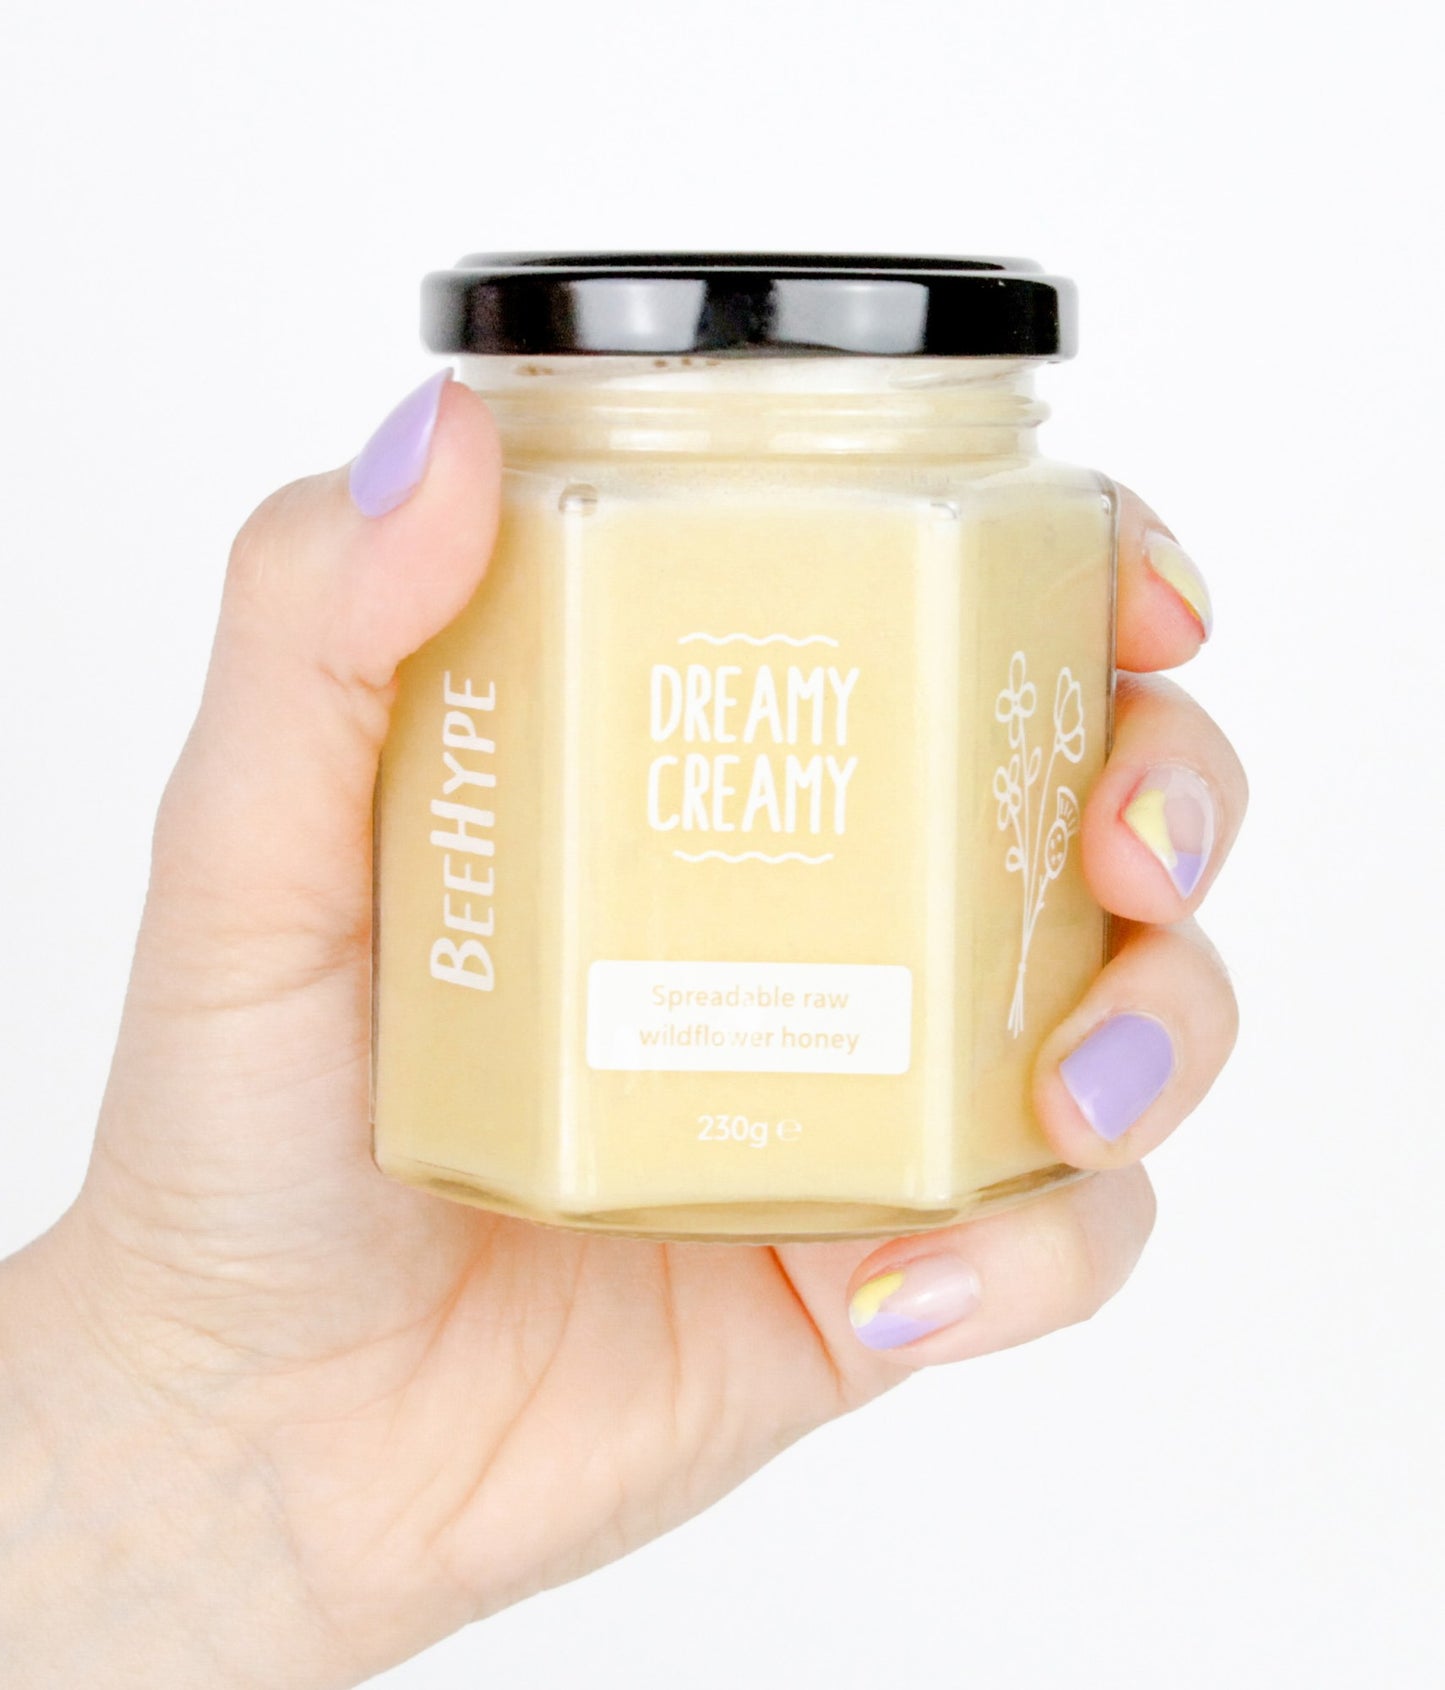 Dreamy Creamy - Raw Wildflower Blossom Honey Straight From The Hive